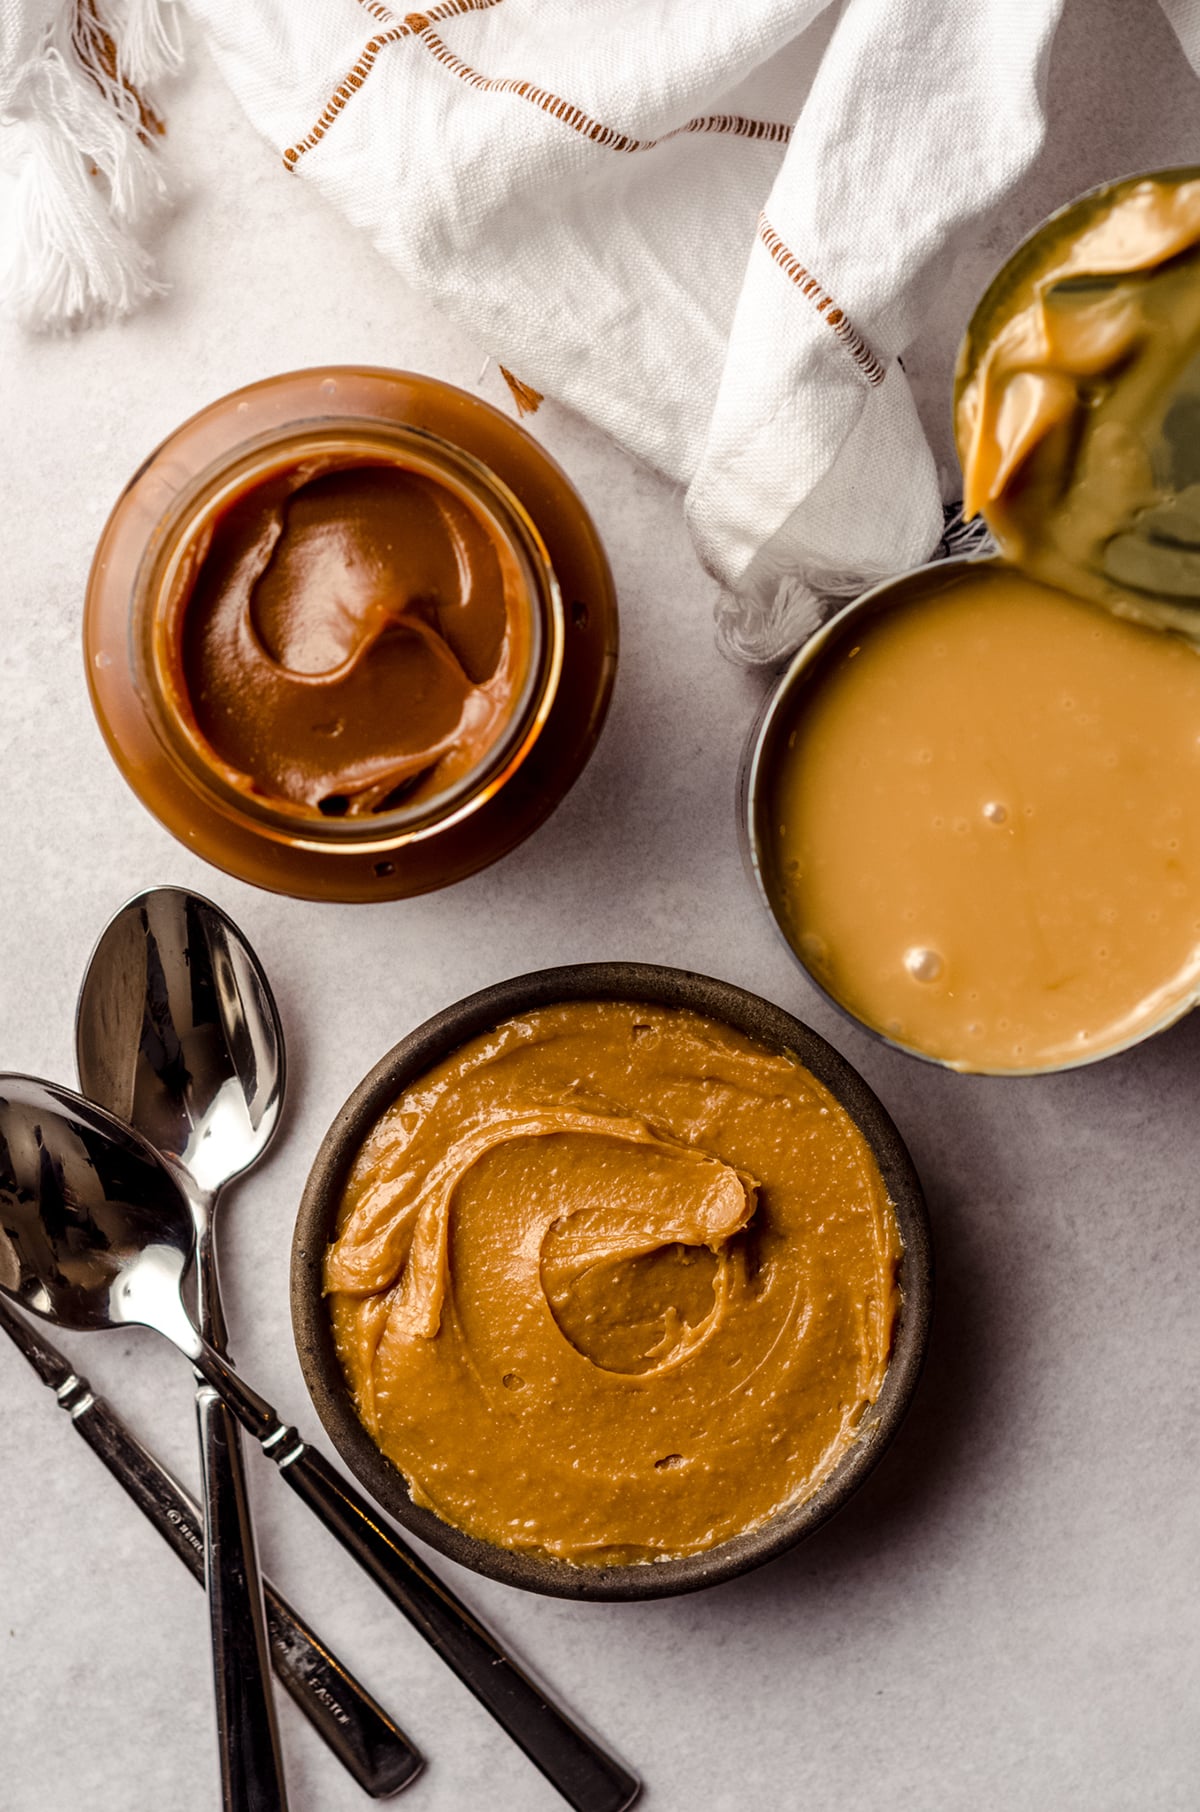 three kinds of dulce de leche-- two homemade and one store-bought-- all are different colors and textures